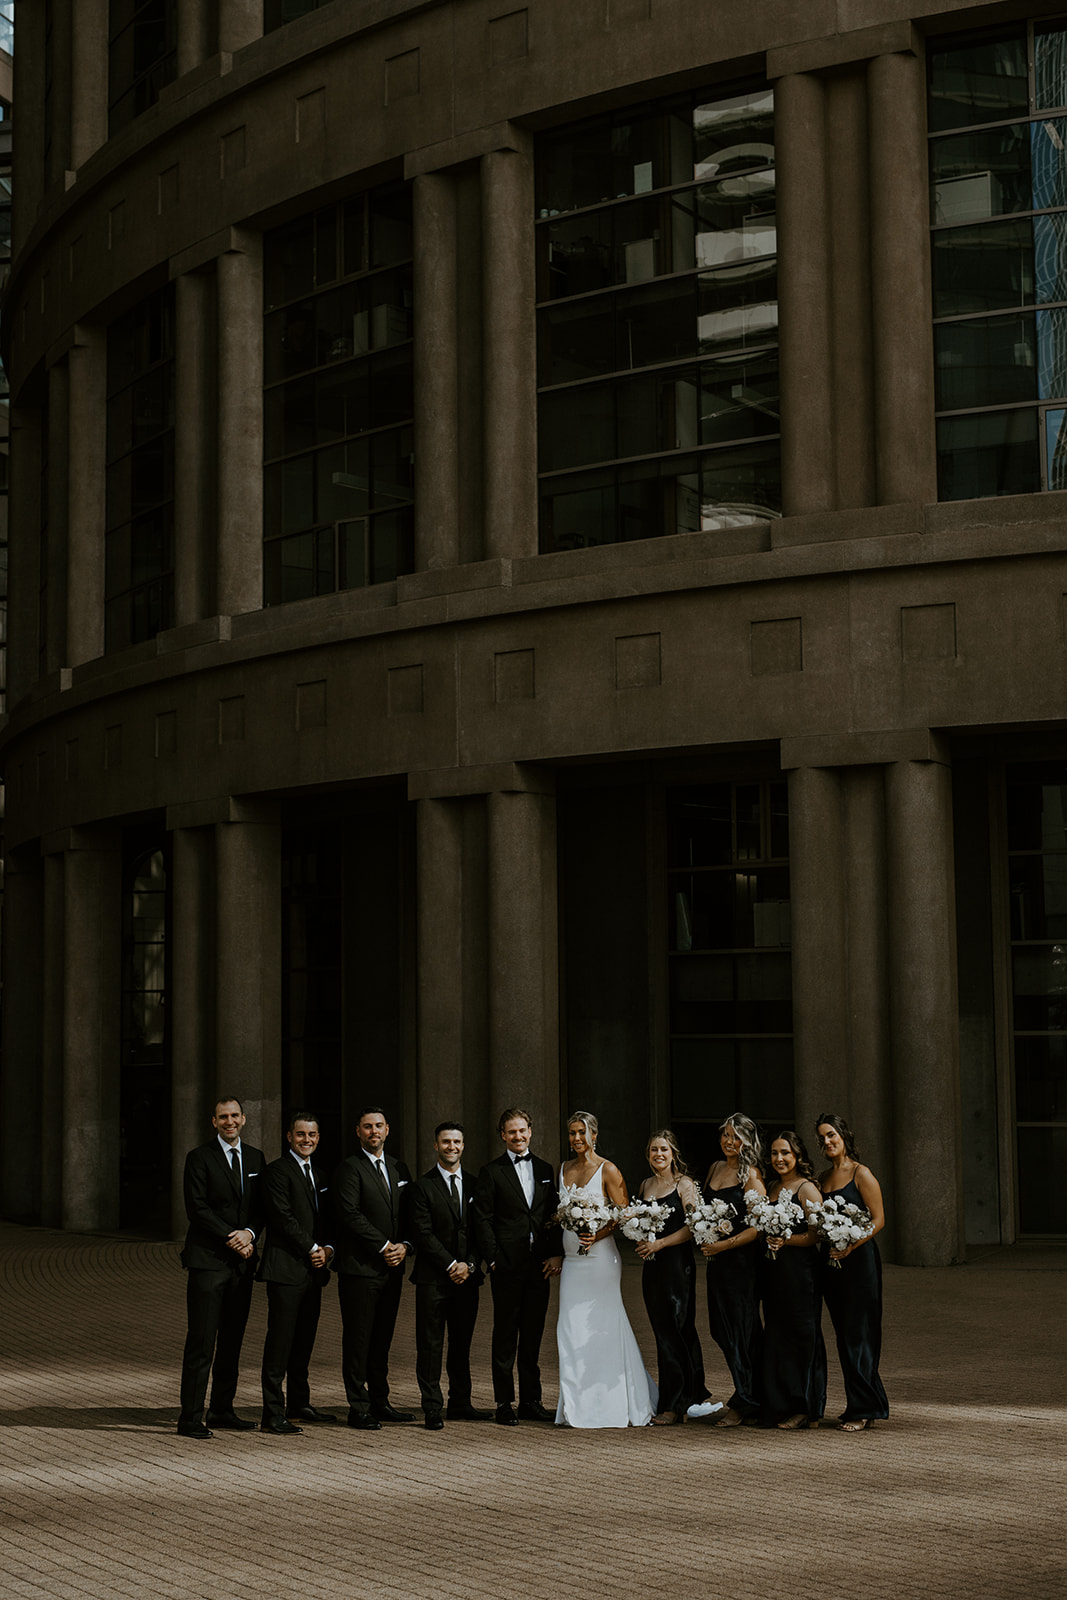 The Best Wedding Photographer in Vancouver